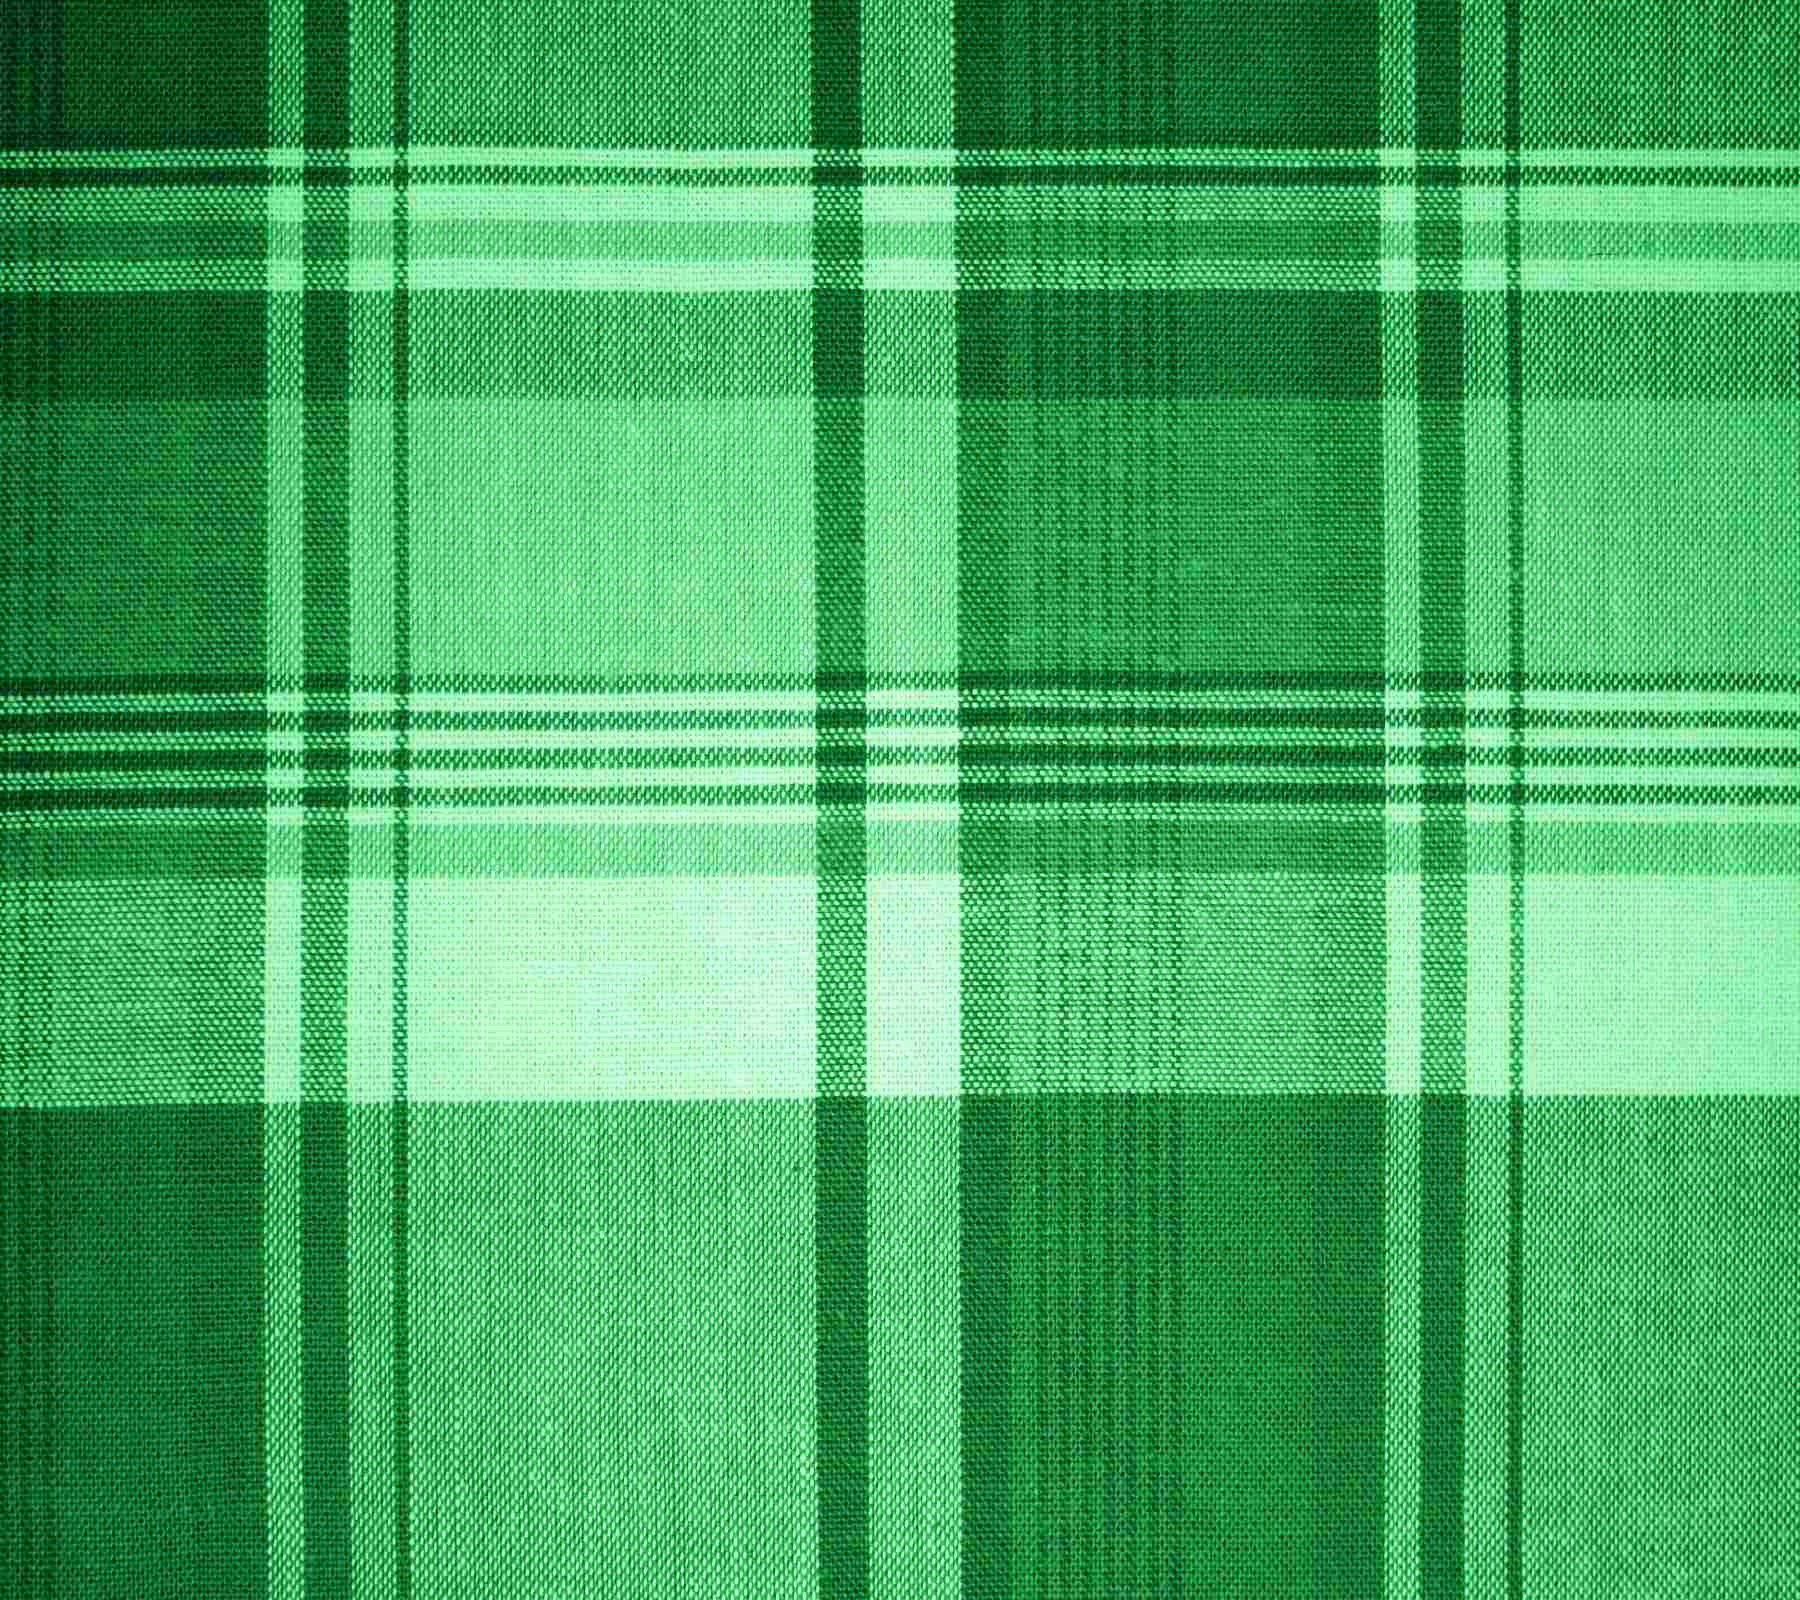 Green Plaid Fabric Background 1800x1600 Background Image Wallpaper or